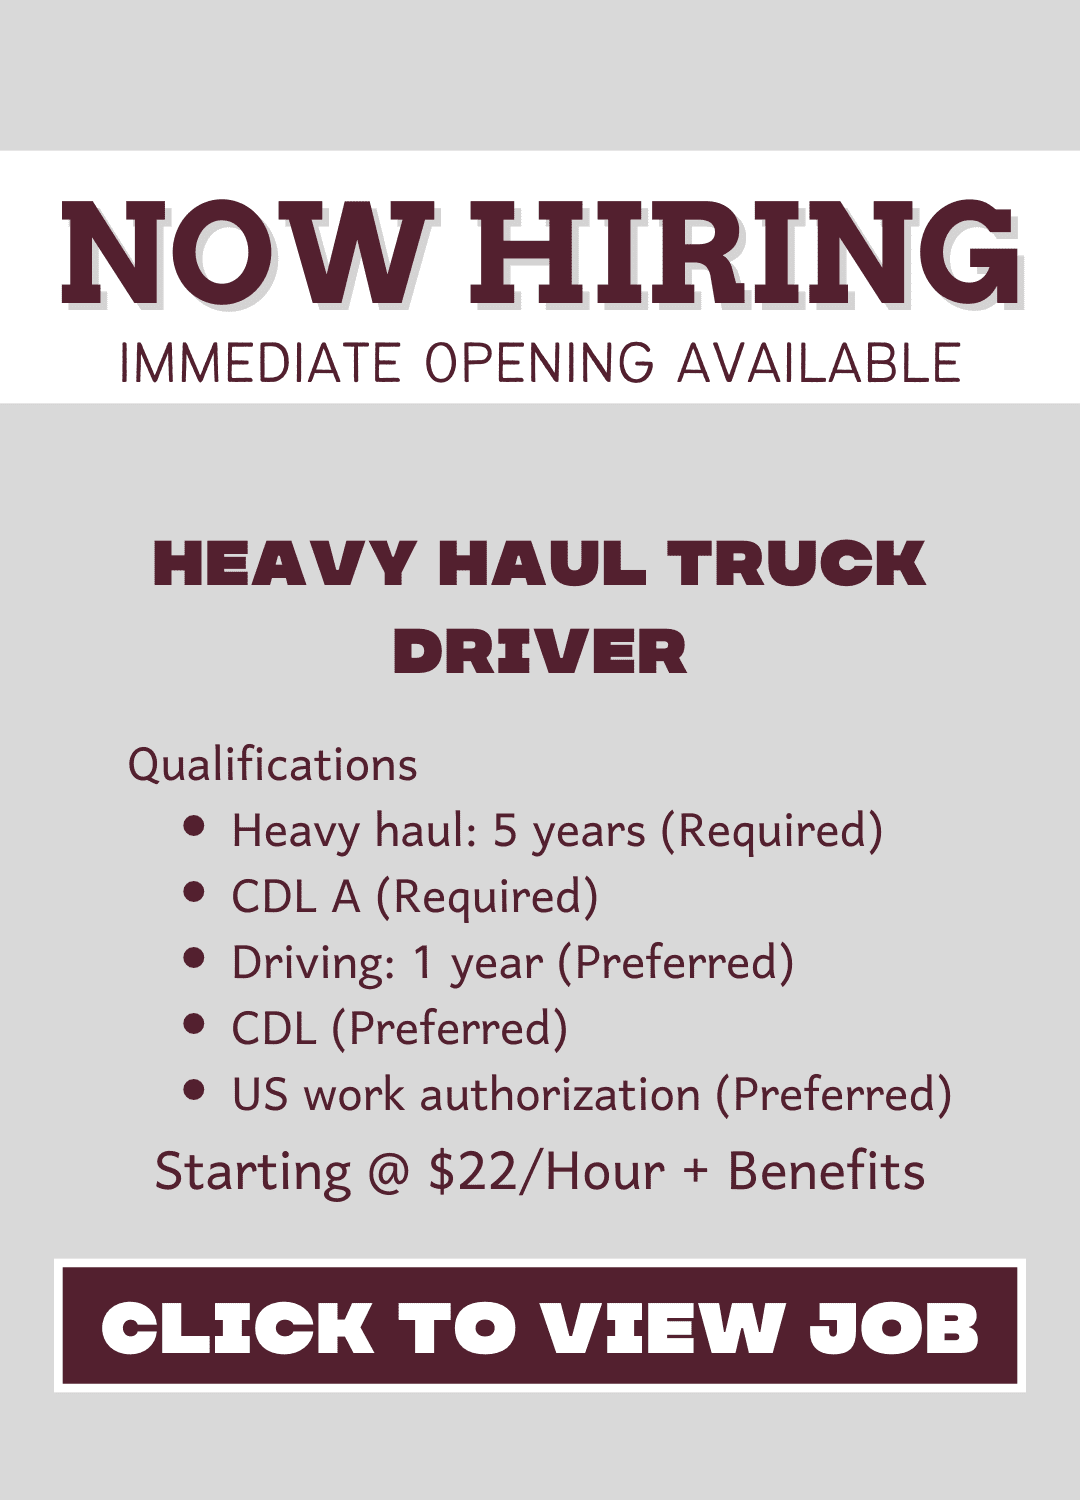 Hiring Link for Heavy Haul Truck Driver